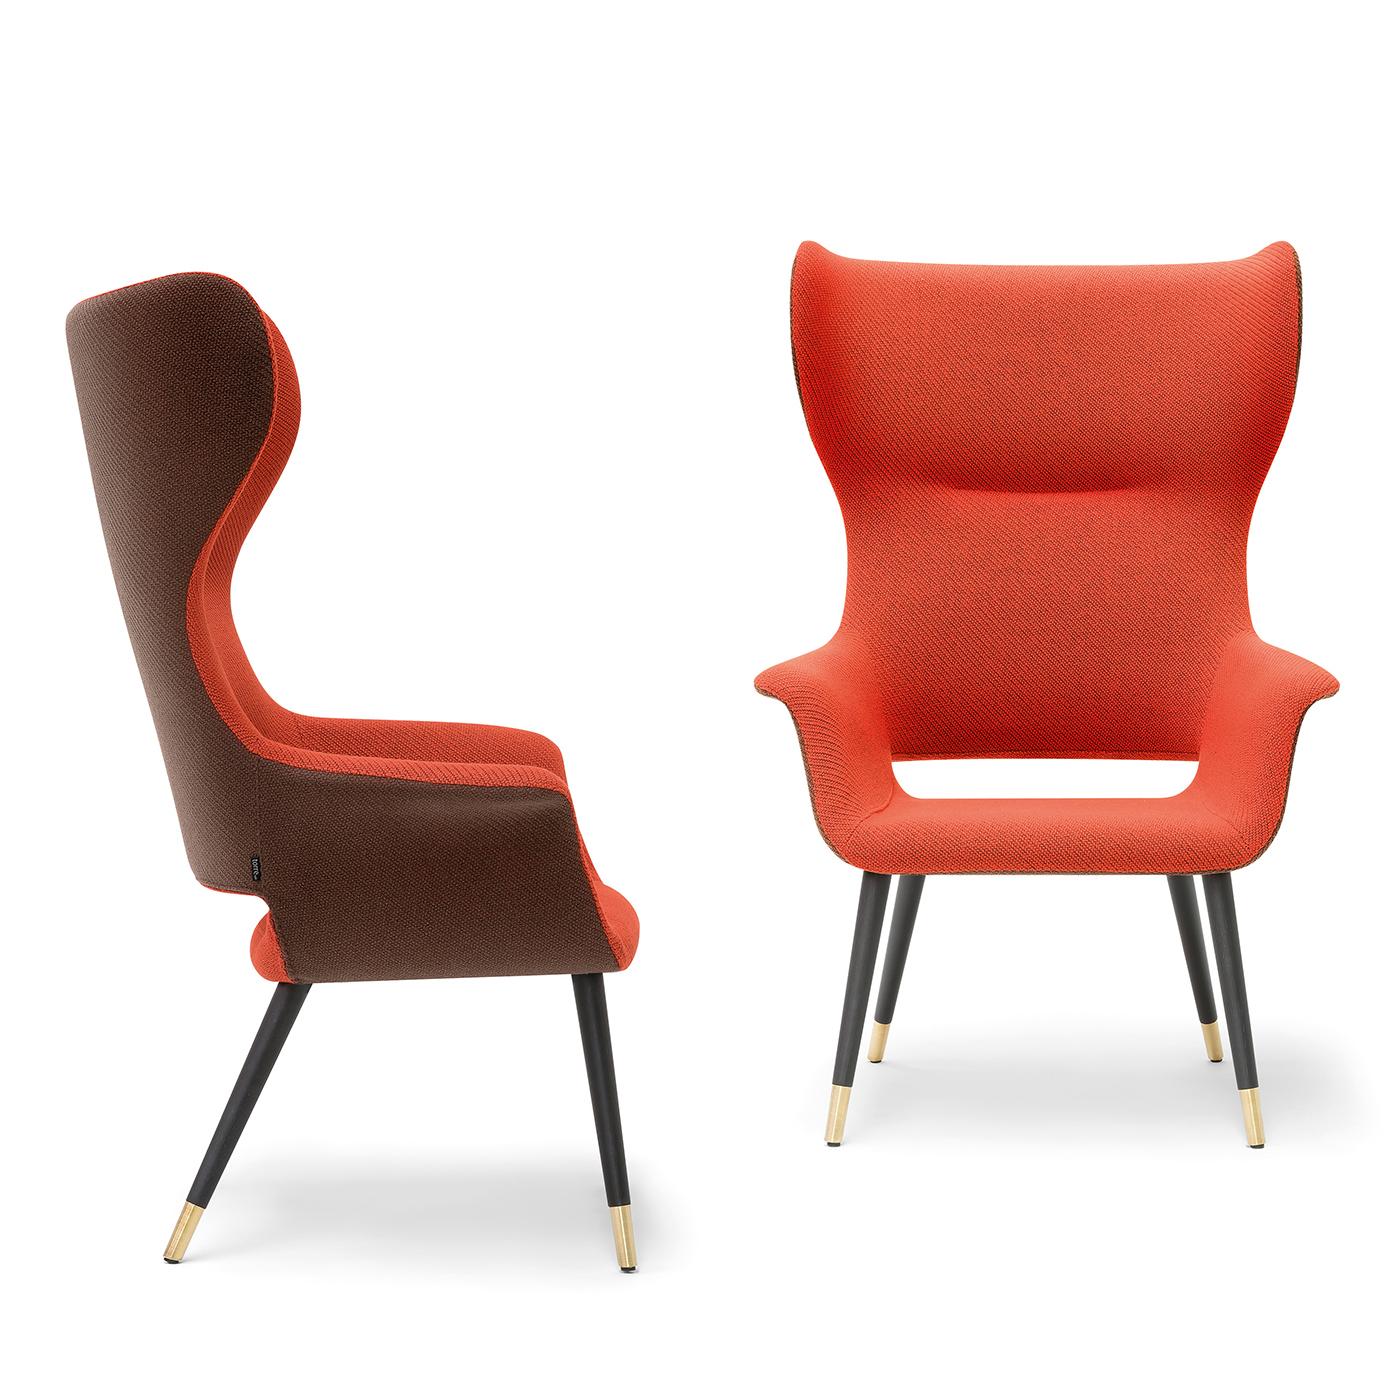 An exploration of the essence of forms, this timeless bergère armchair designed by Carlesi & Tonelli will add a sophisticated touch to any room. Characterized by a welcoming, sinuous silhouette entirely padded with polyurethane foam, it rests on a